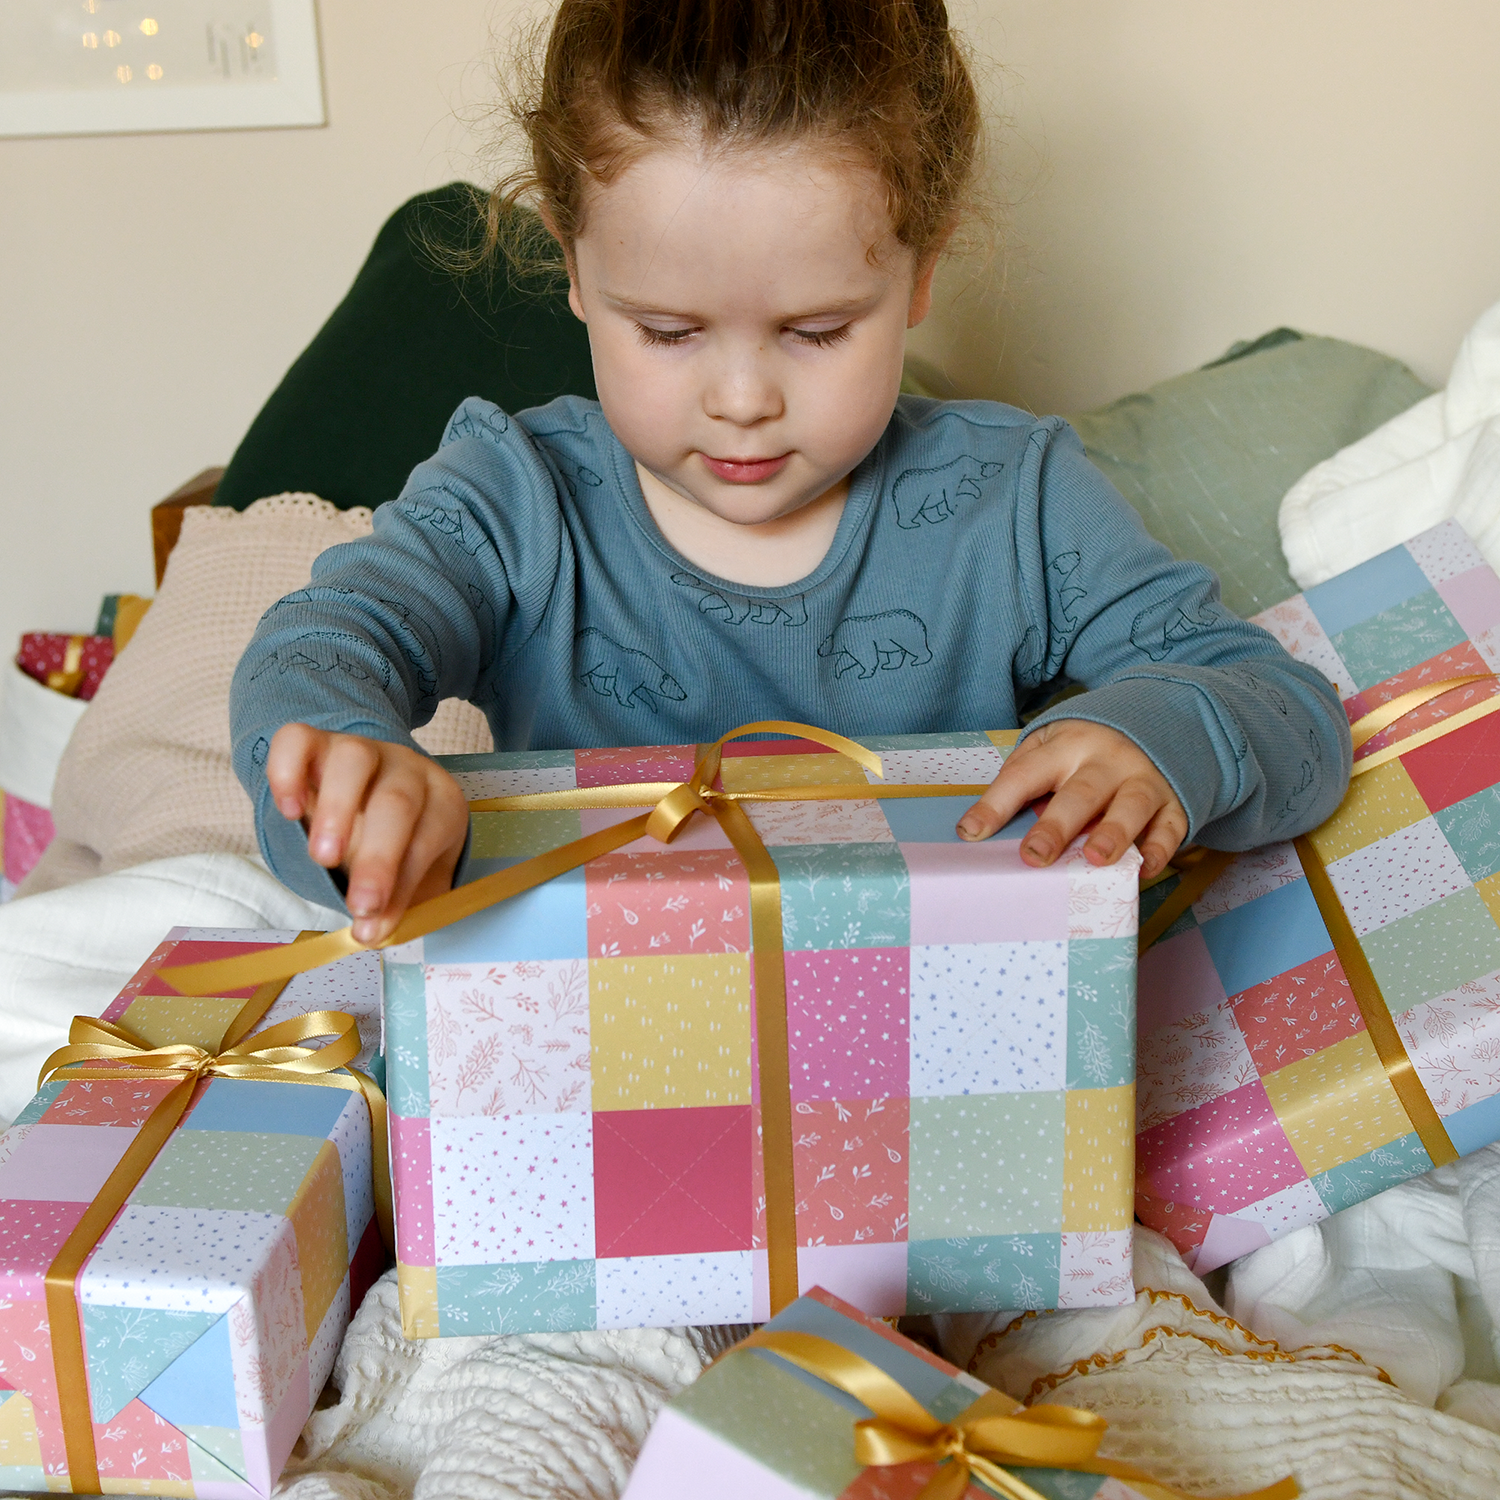 Patchwork Quilt Hug Recyclable Wrapping Paper Set 